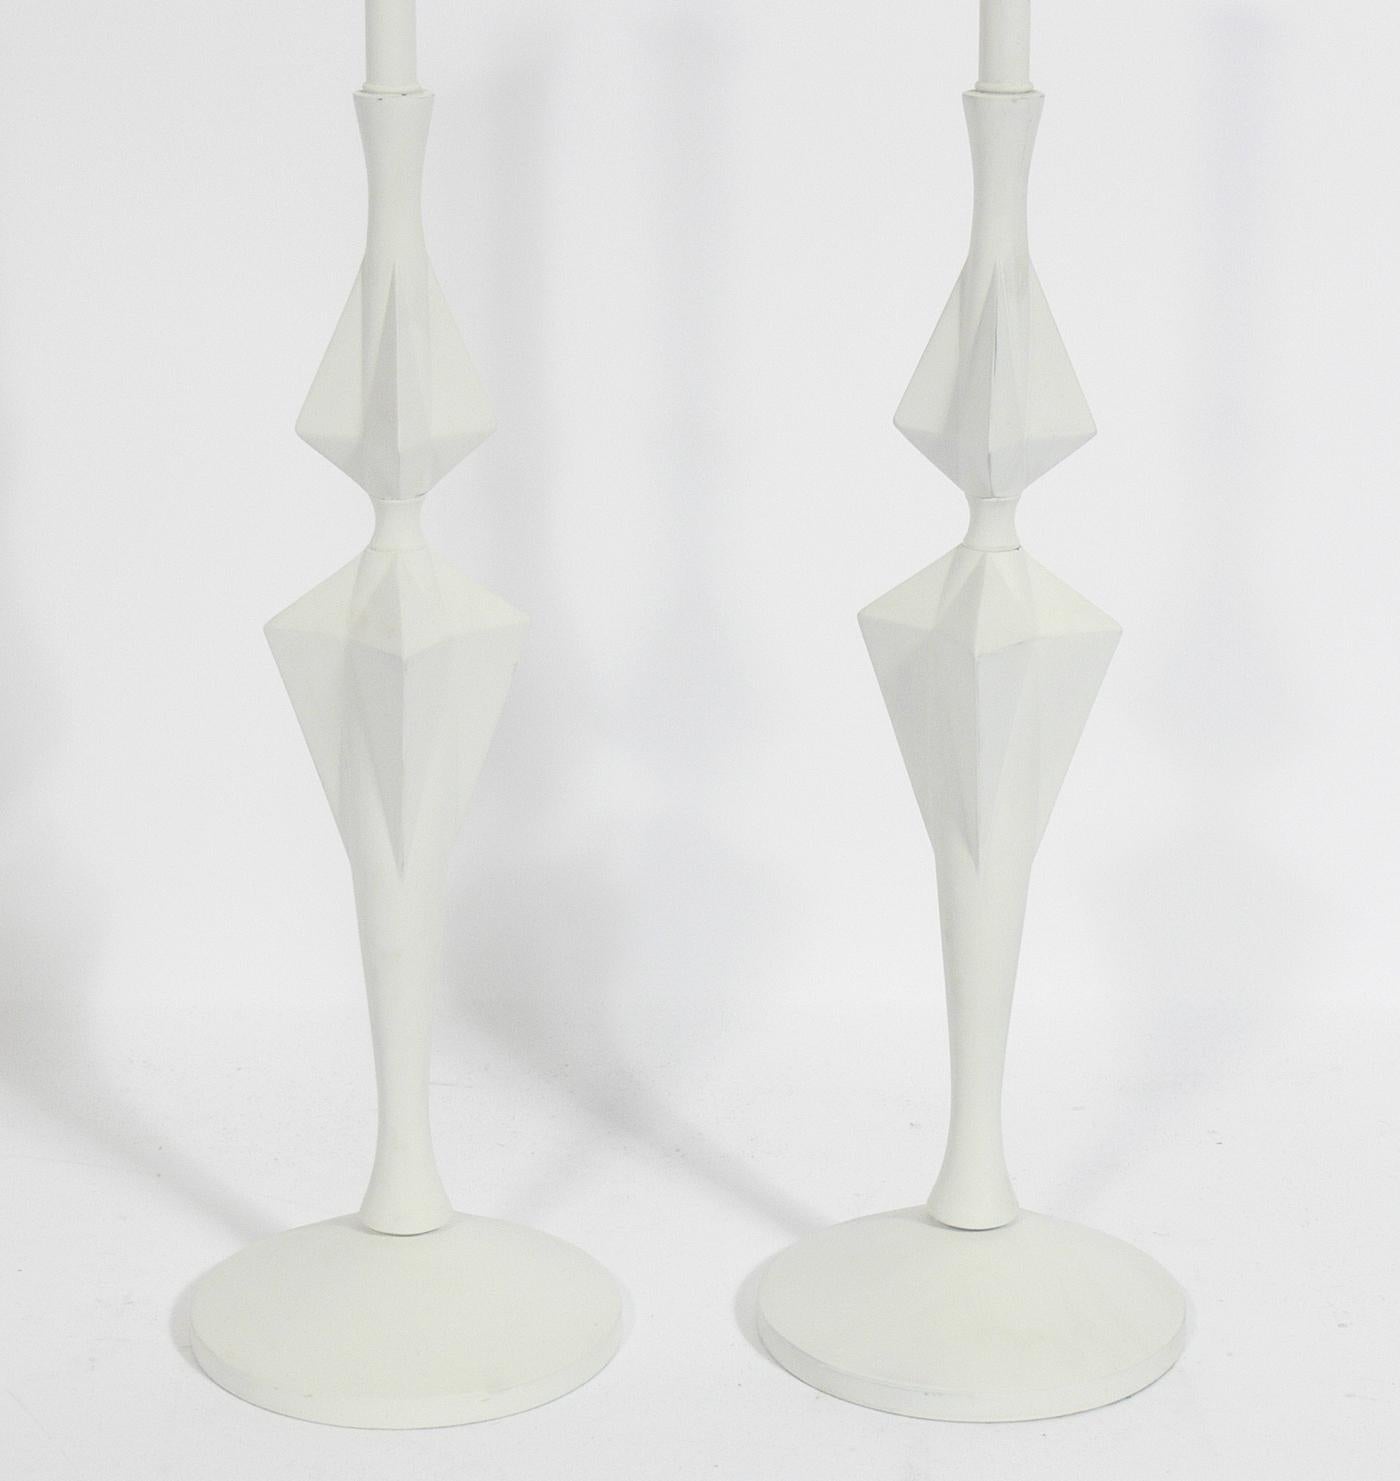 Pair of sculptural white lamps, in the manner of Diego Giacometti, probably American, circa 1950s. They have been rewired and are ready to use. The price noted includes the shades.